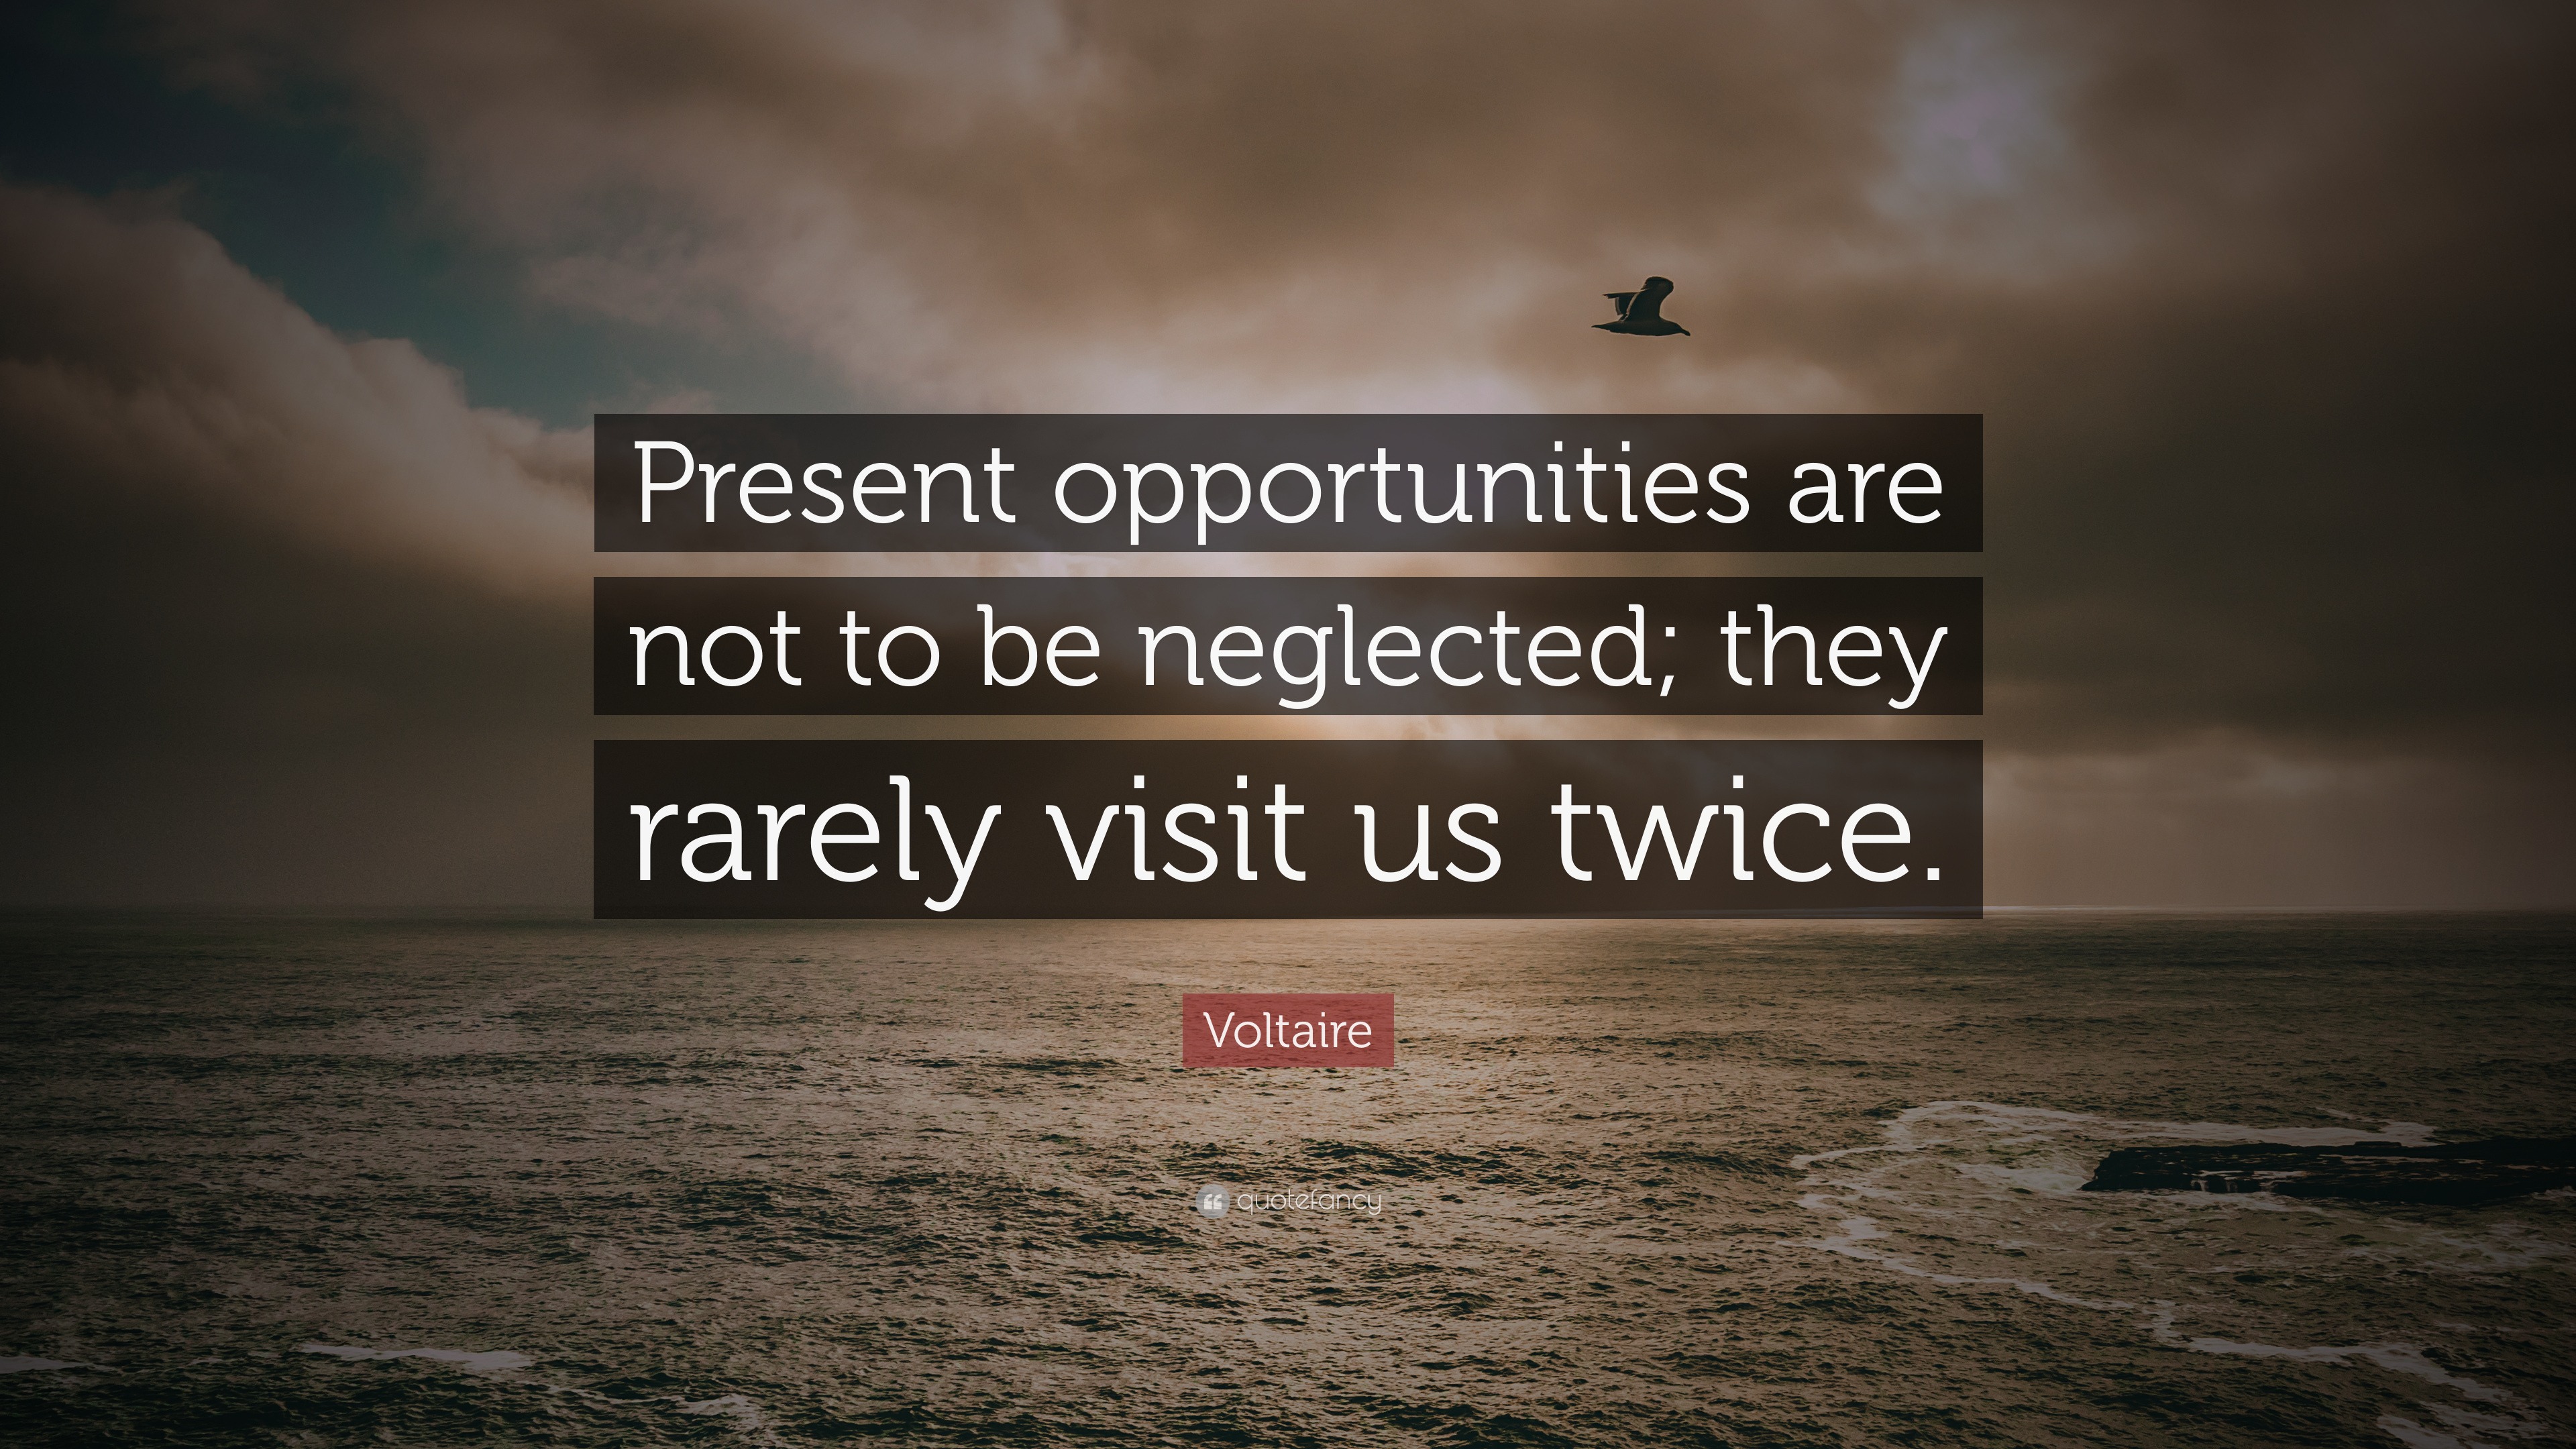 Voltaire Quote: “Present opportunities are not to be neglected; they